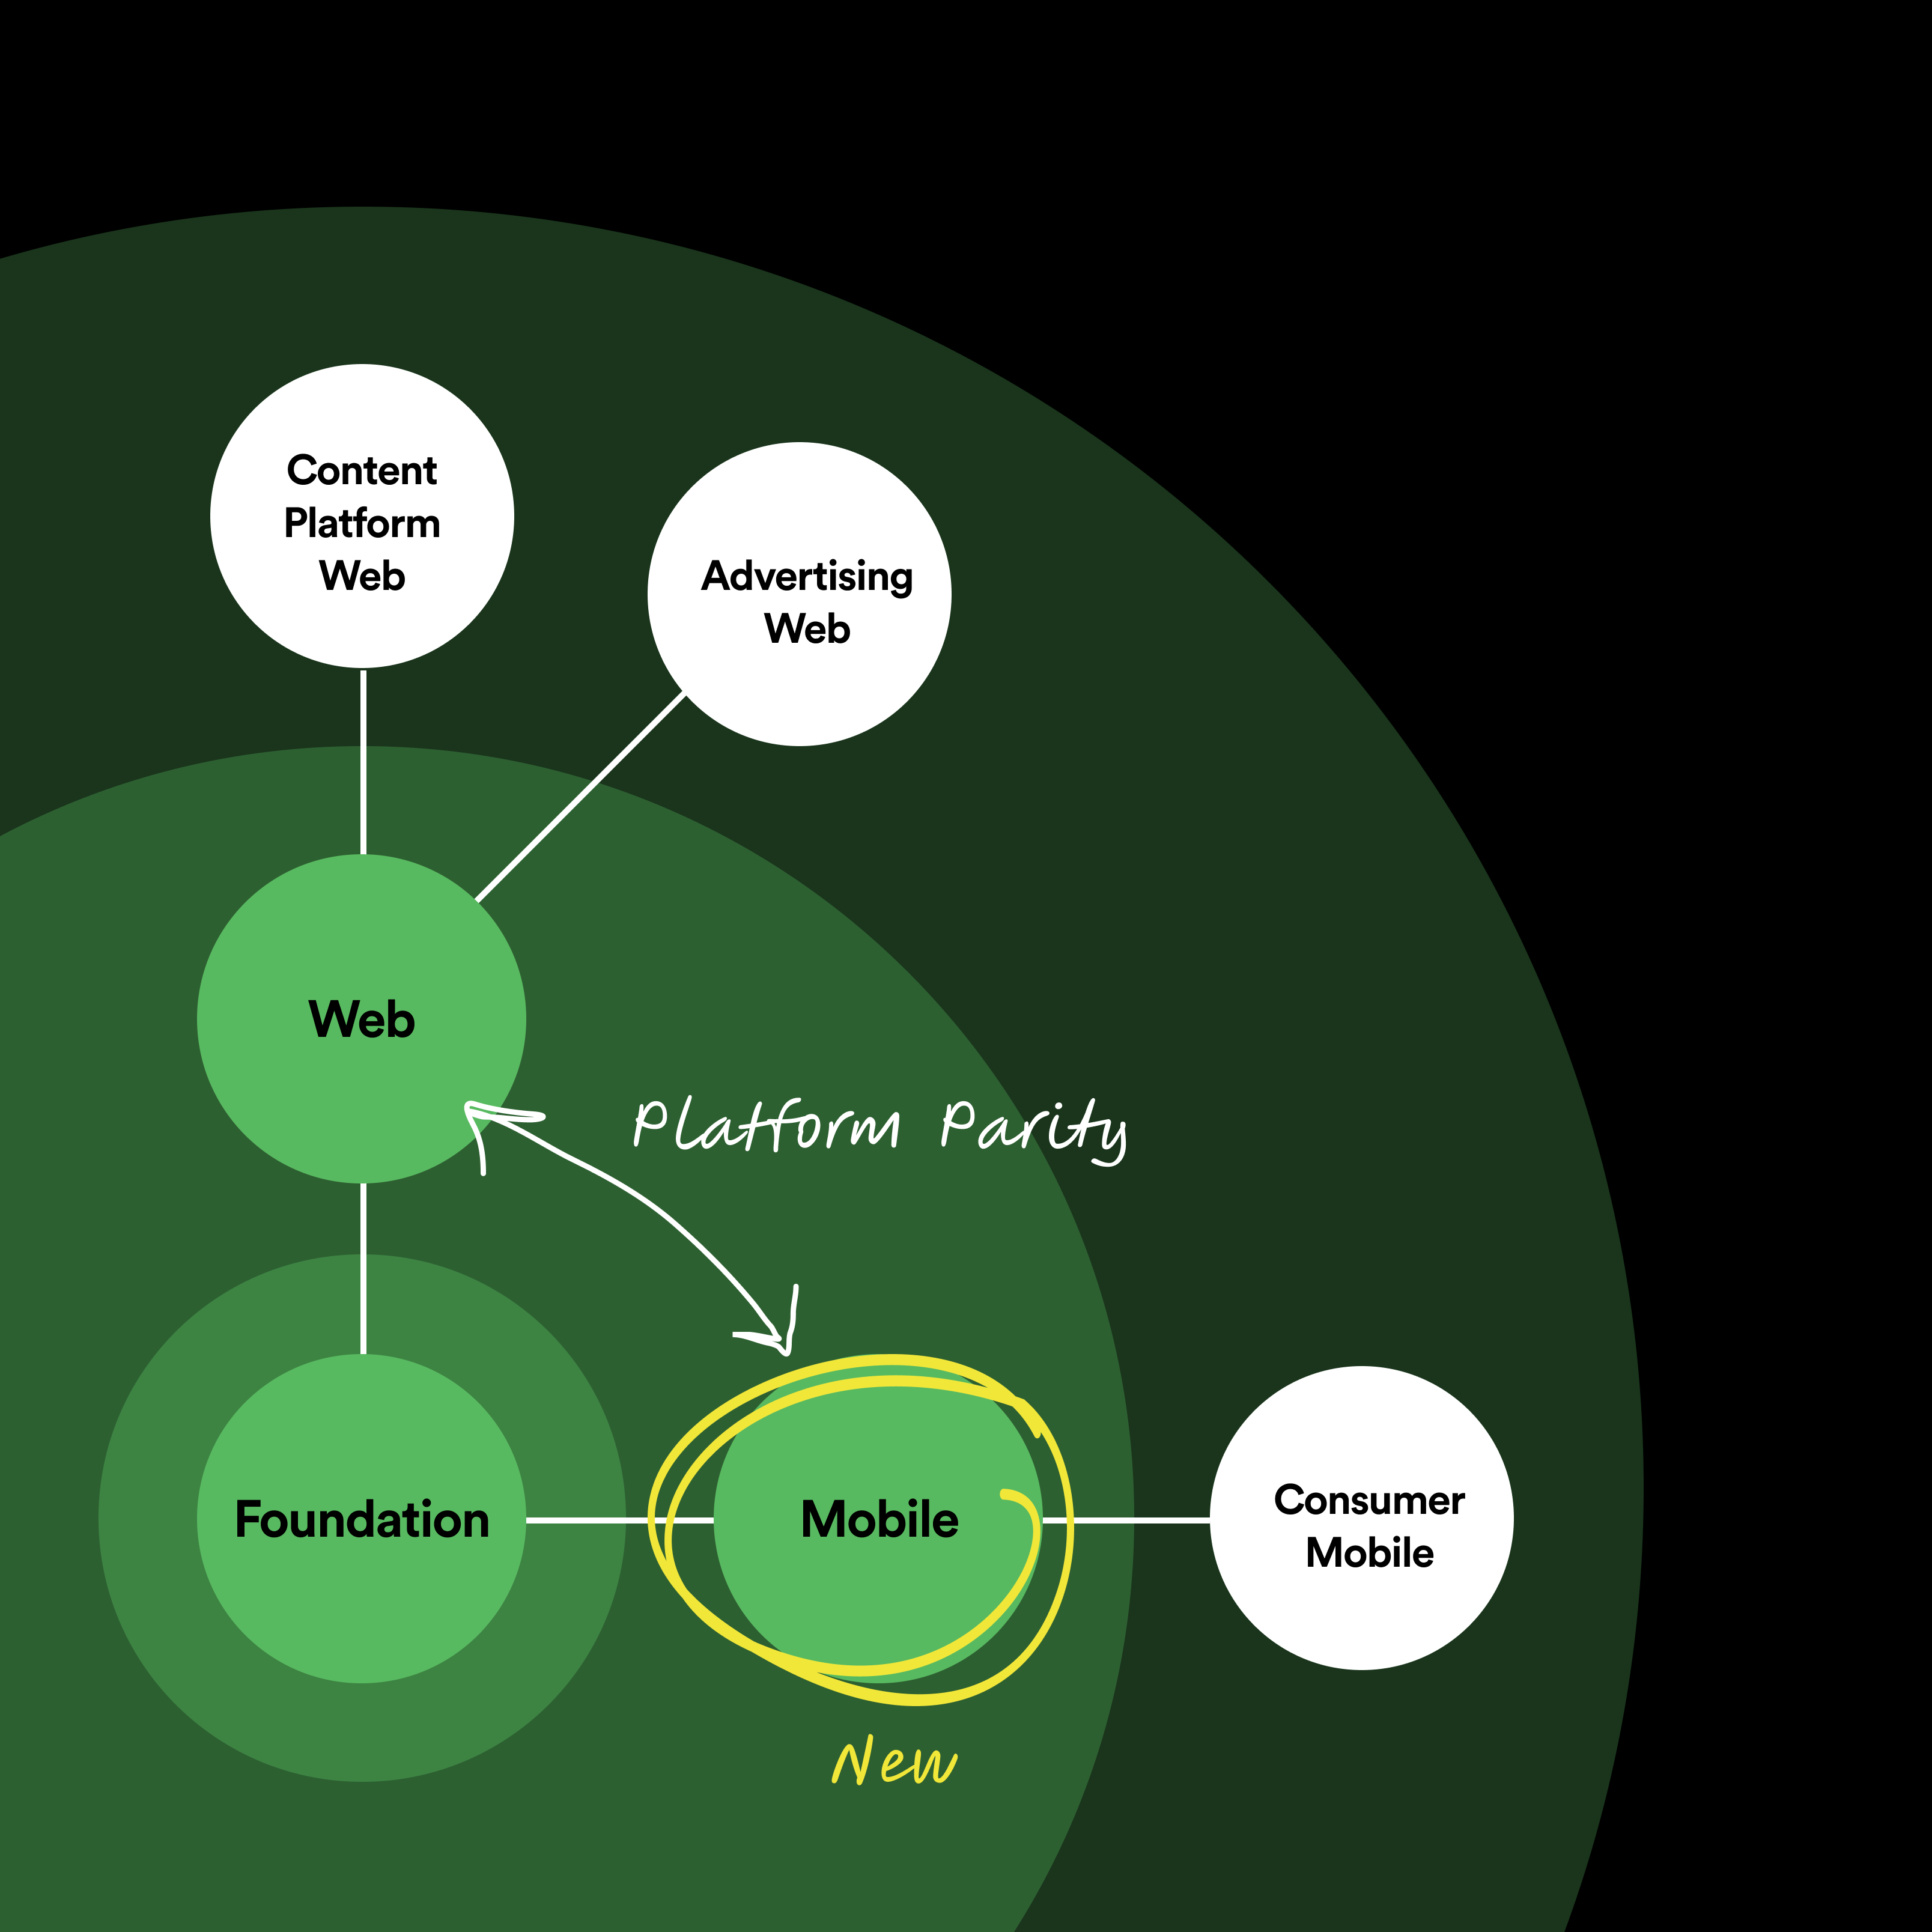 Concentric circles showing Encore's system layers, with "Foundation" at its core, followed by “Web” and “Mobile”, then “Content Web Platform”, “Advertising Web”, “Consumer Mobile”. Annotations indicate that “Mobile” is the new layer, and it has platform parity with “Web”.